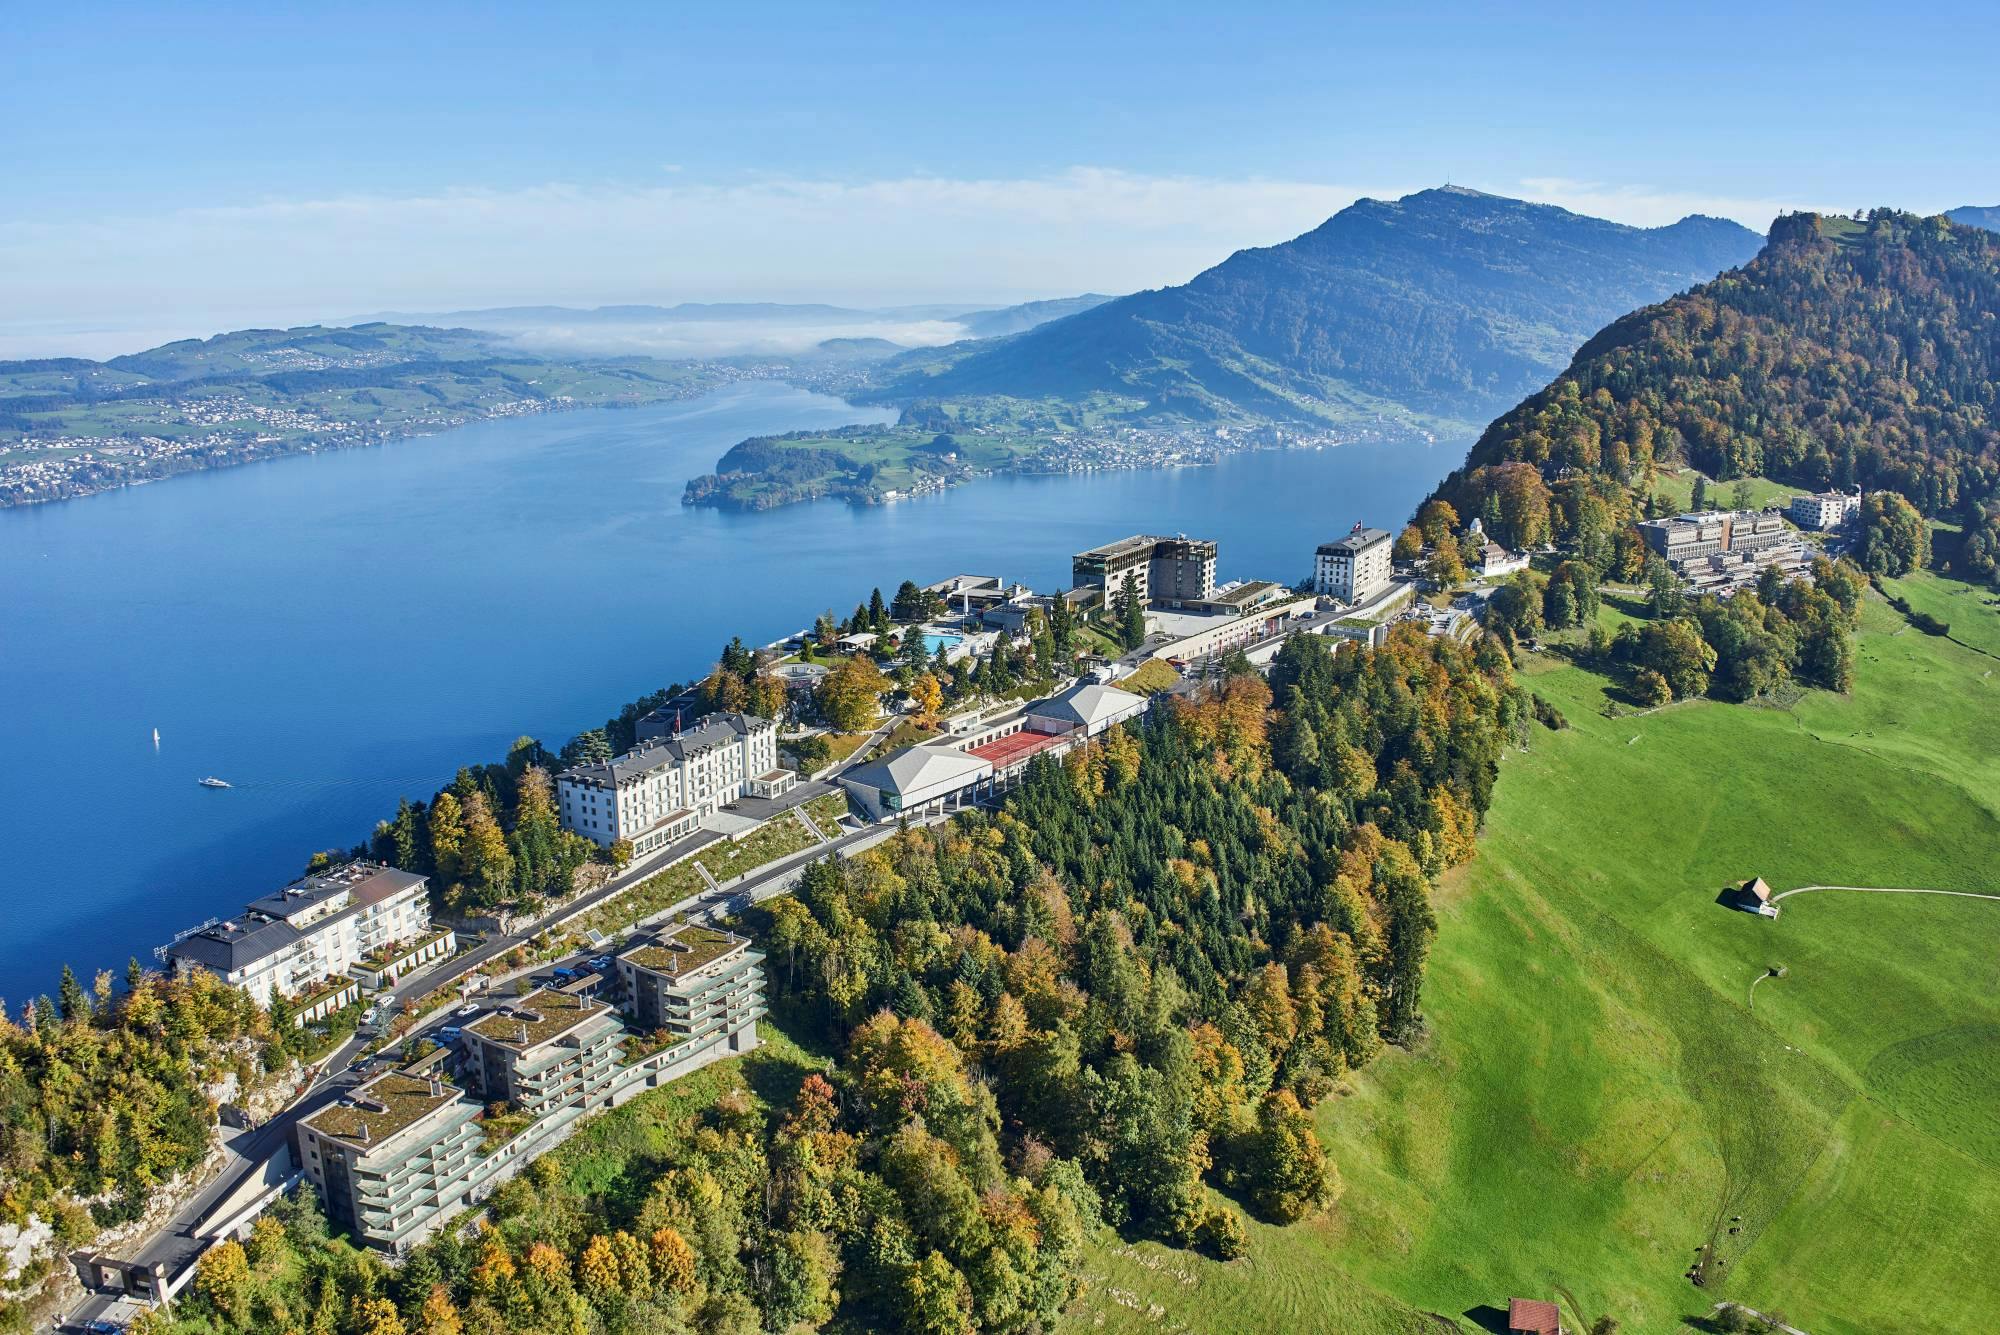 1-day tour to Lucerne and Bürgenstock from Zurich